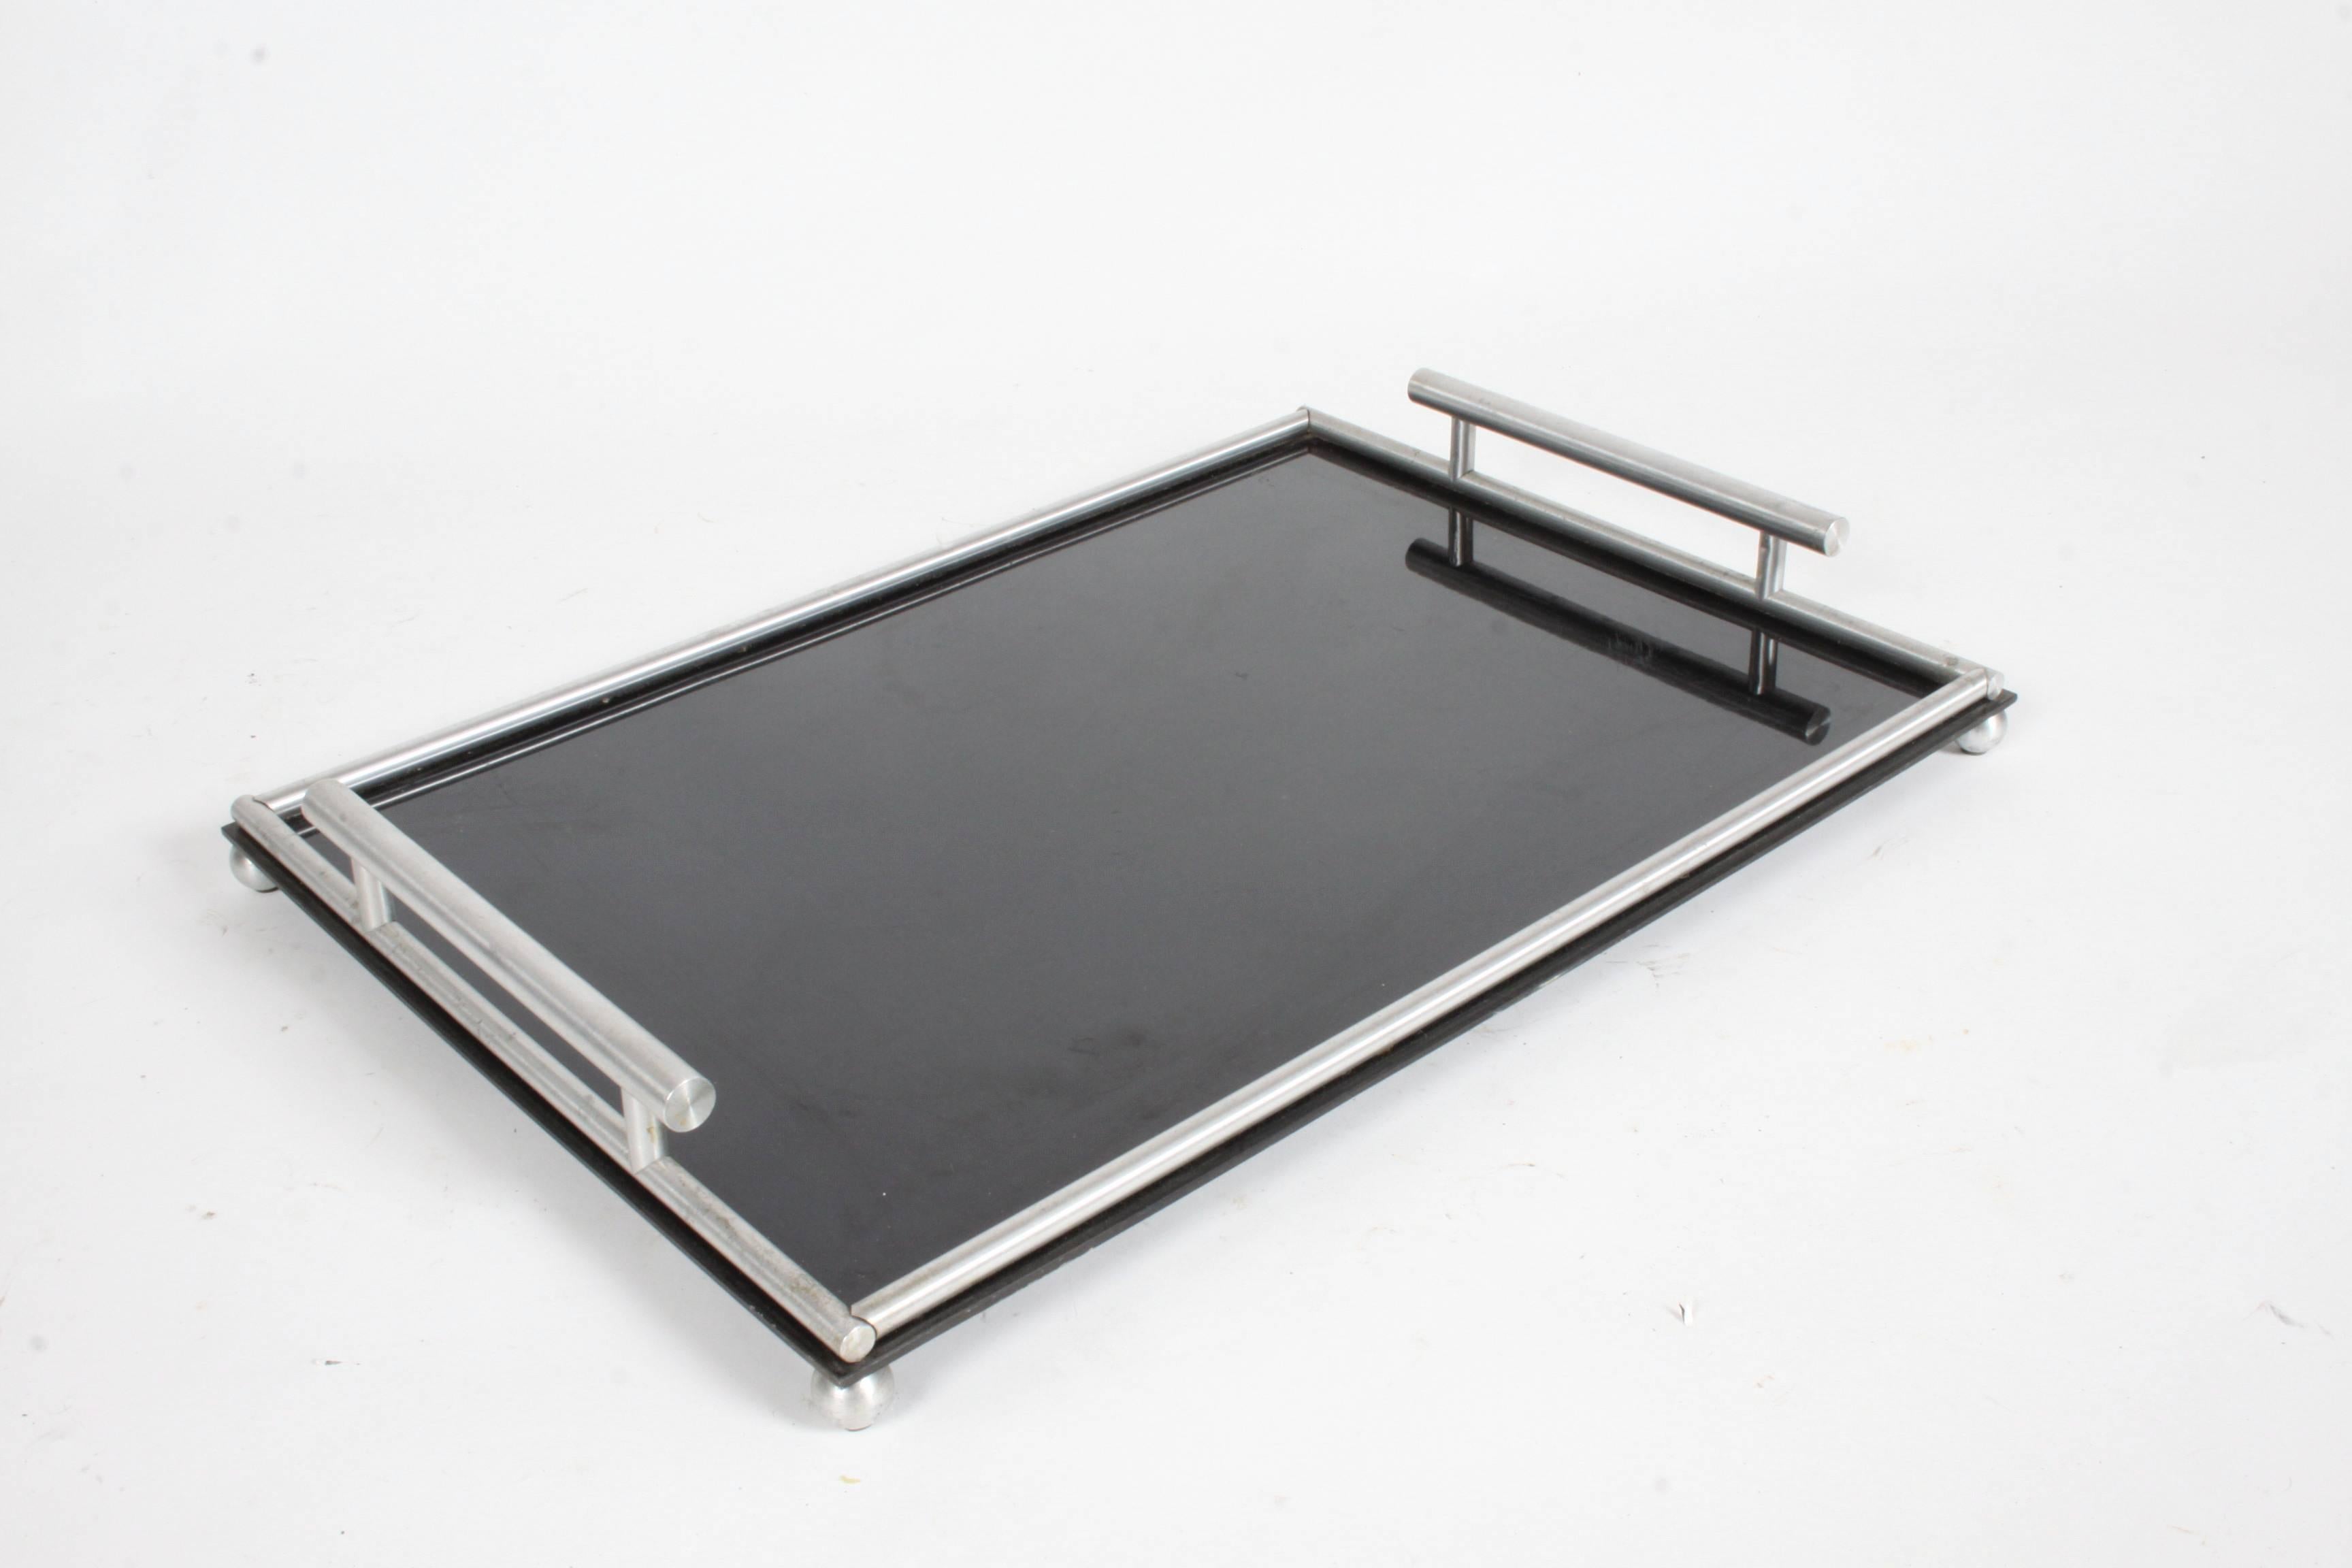 Rare Deco Aero Art DC3 serving tray by Franz Industries, machine age. See my other listings for the cart and beverage tray.